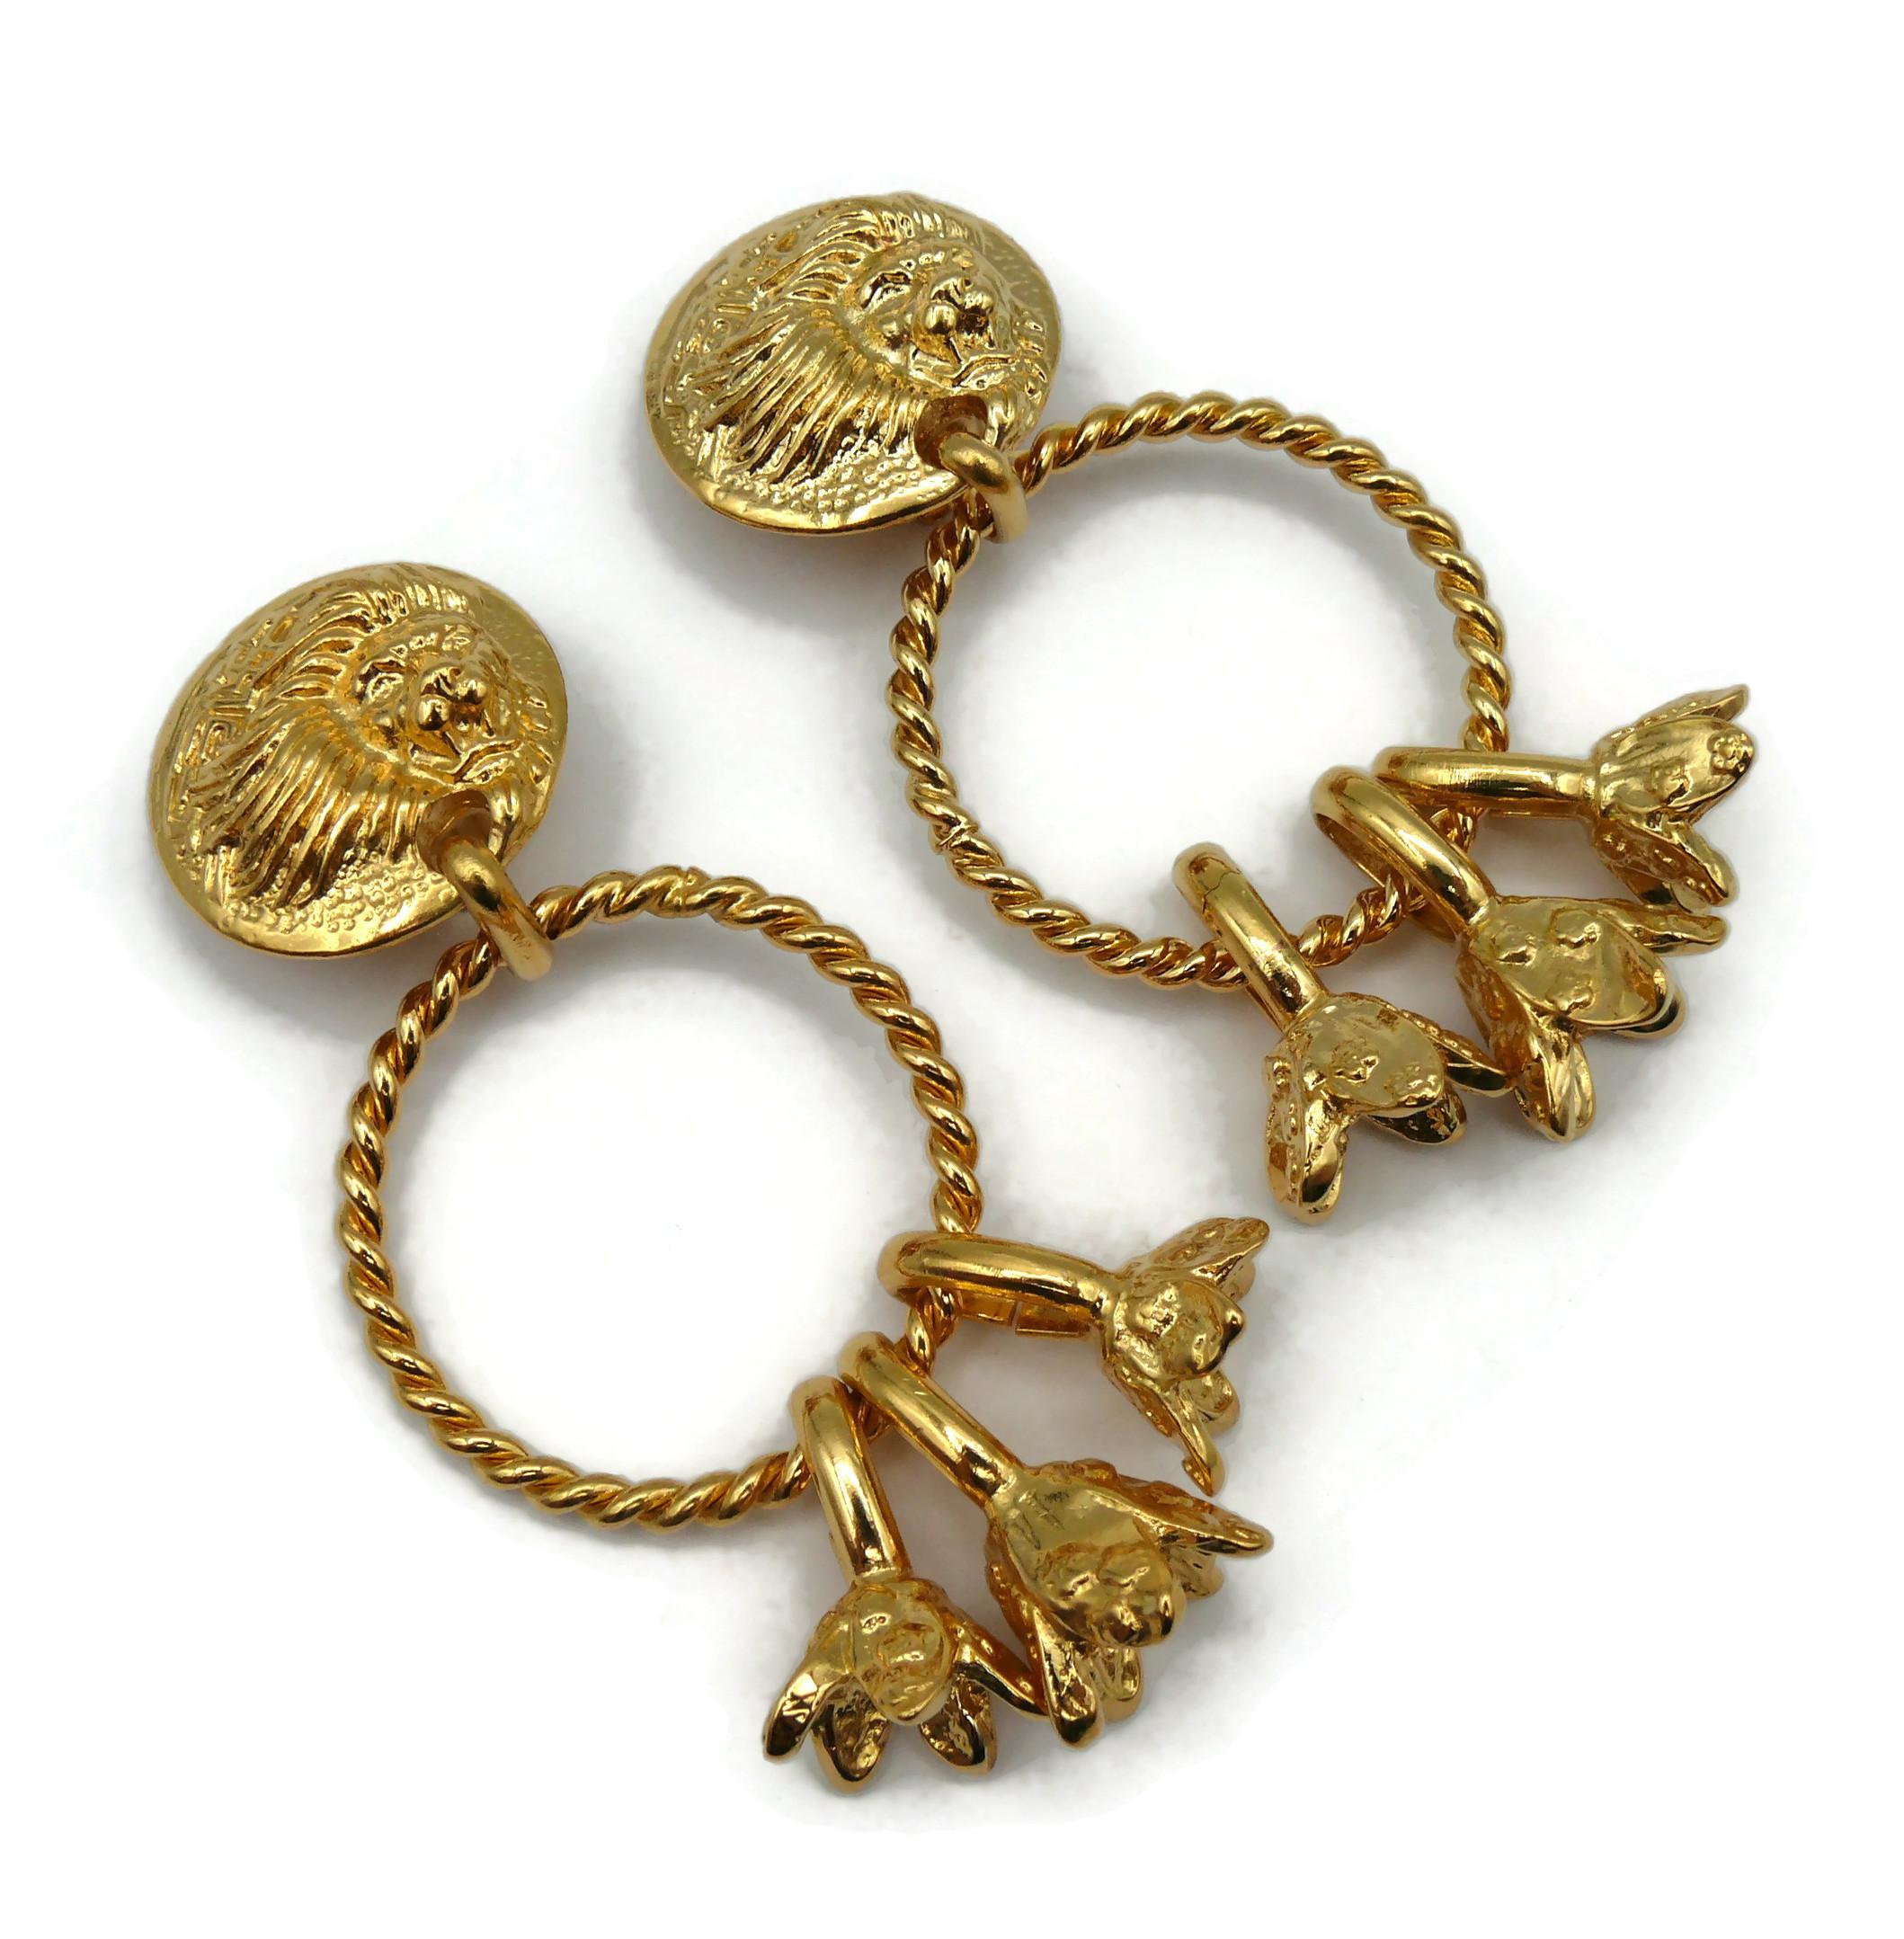 VERSUS by GIANNI VERSACE Vintage Gold Tone Lion Head Dangling Earrings In Good Condition For Sale In Nice, FR